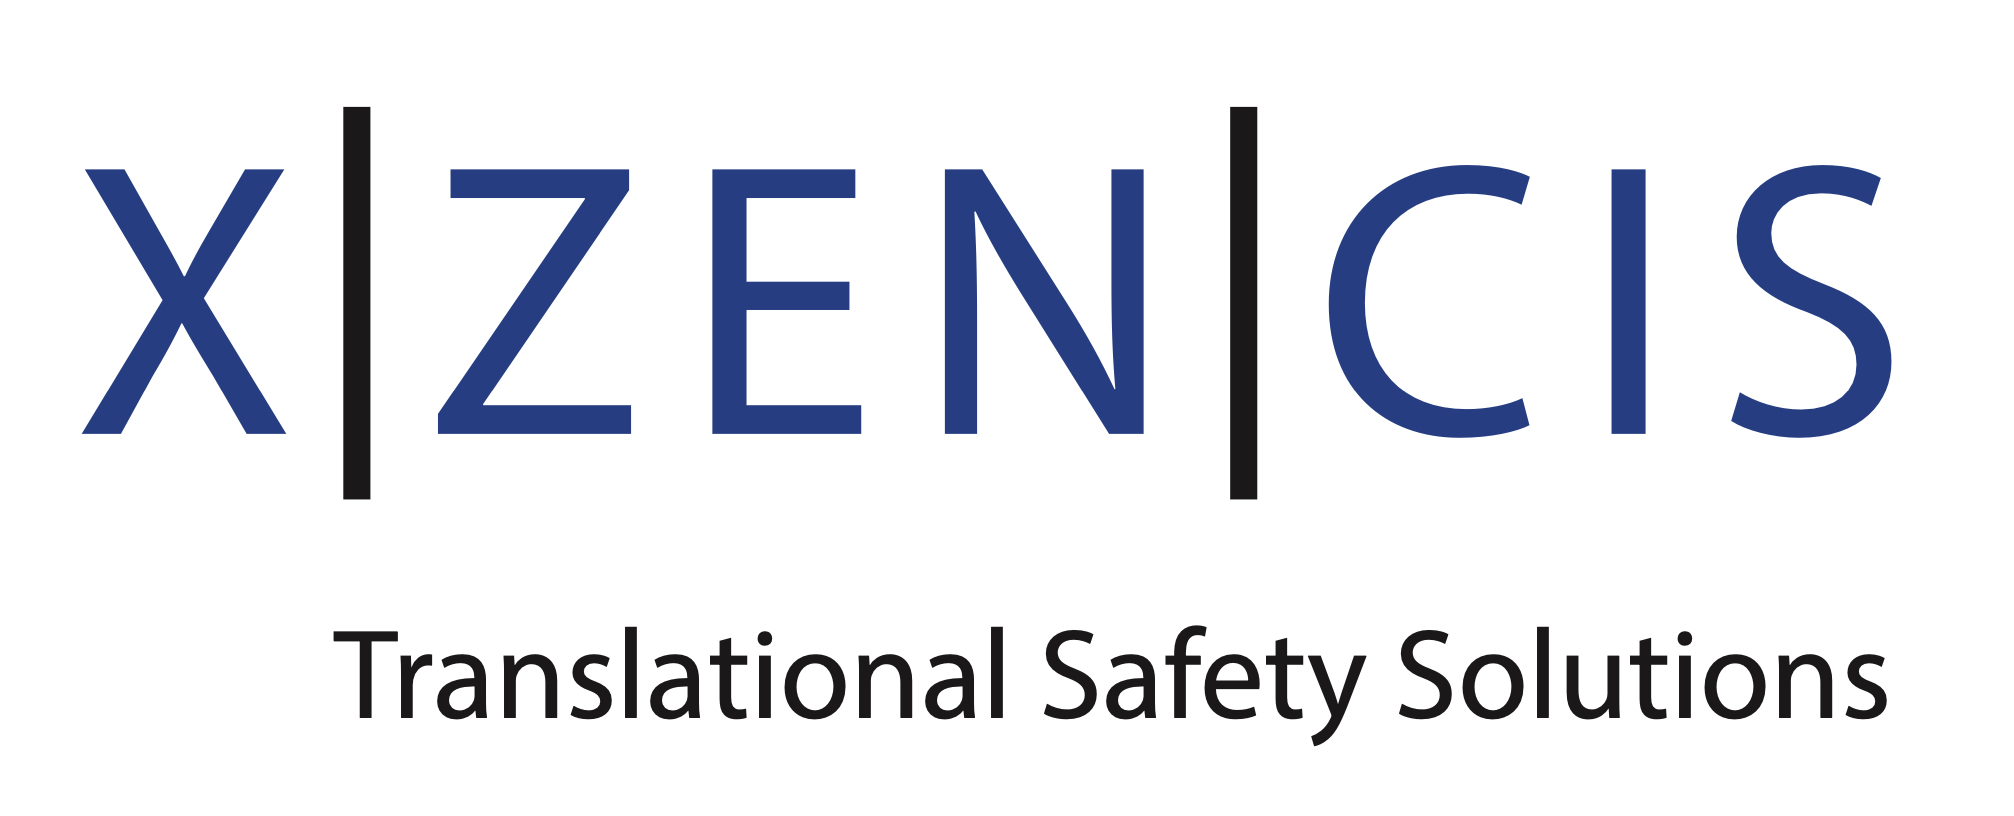 Xzencis partners with ApconiX to bring Translational Safety insights to ICT Maastricht